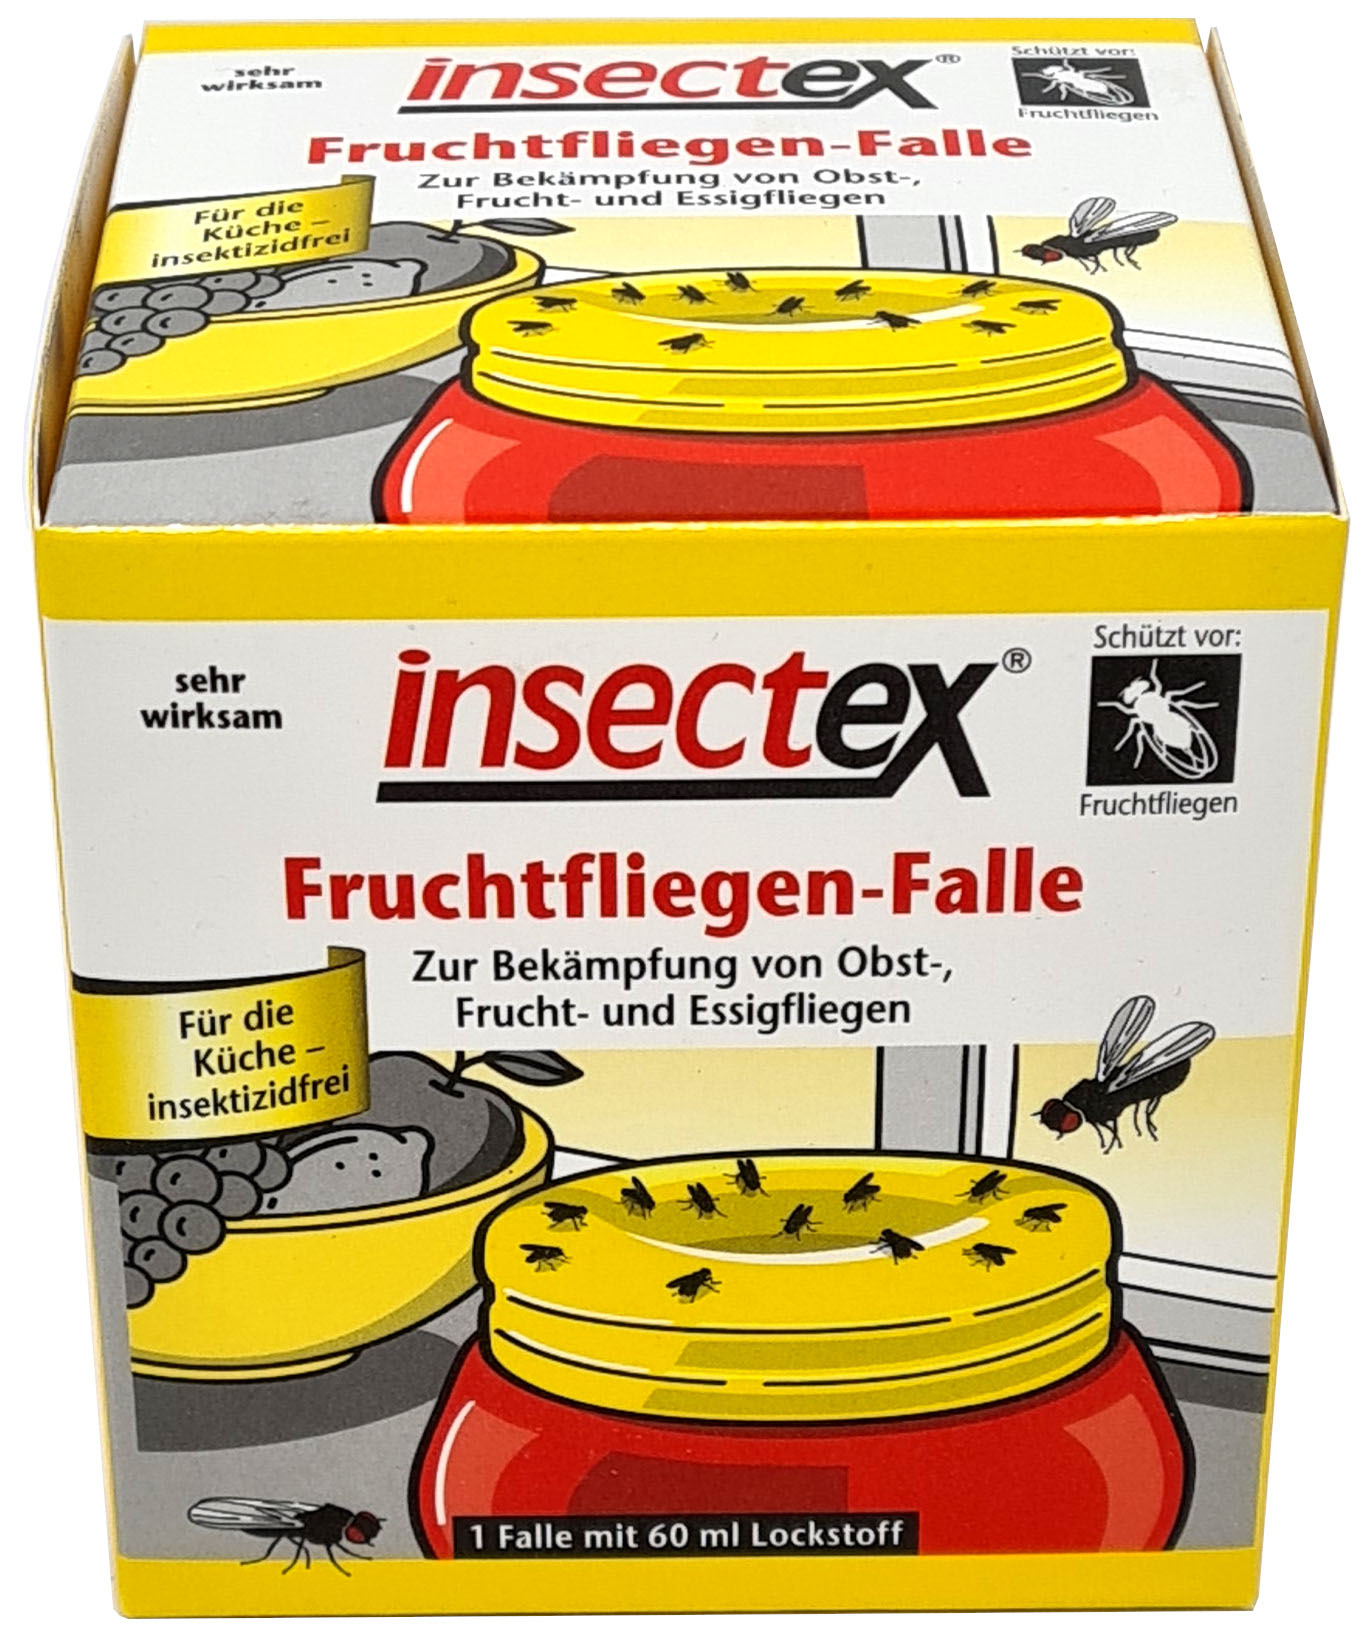 02166 - Fruit fly trap 60ml with glue trap, sales only in Germany, biocide